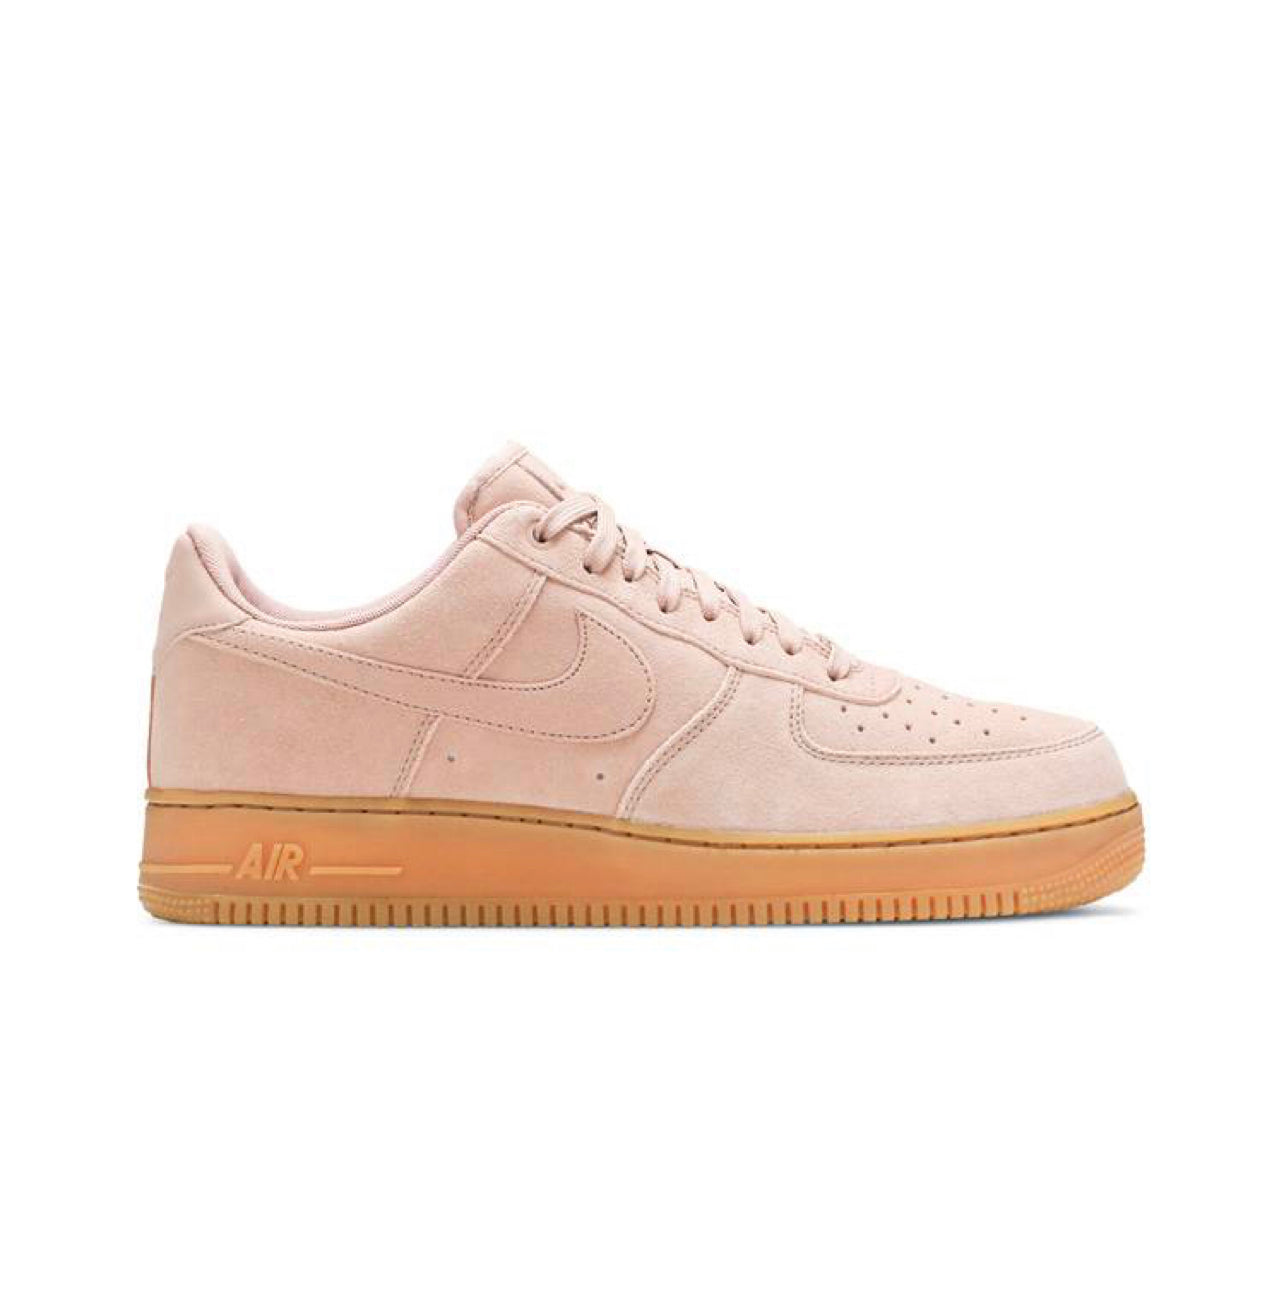 Nike Air Force 1 07 LV8 Suede 'Particle Pink Gum AA1117 600